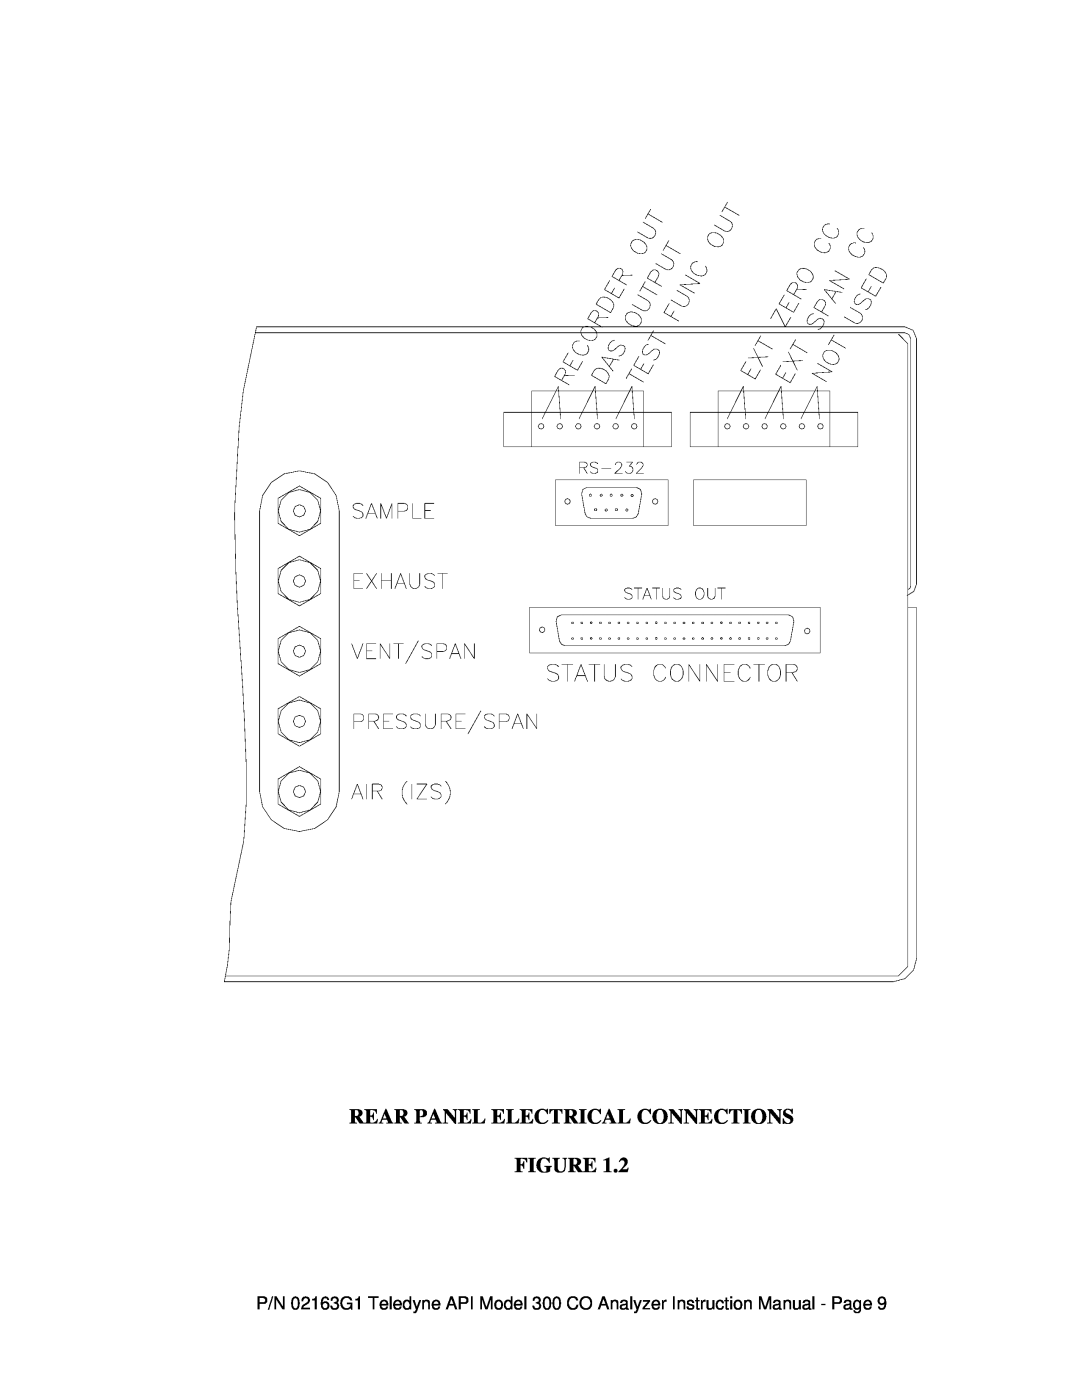 Teledyne 300 instruction manual Rear Panel Electrical Connections Figure 